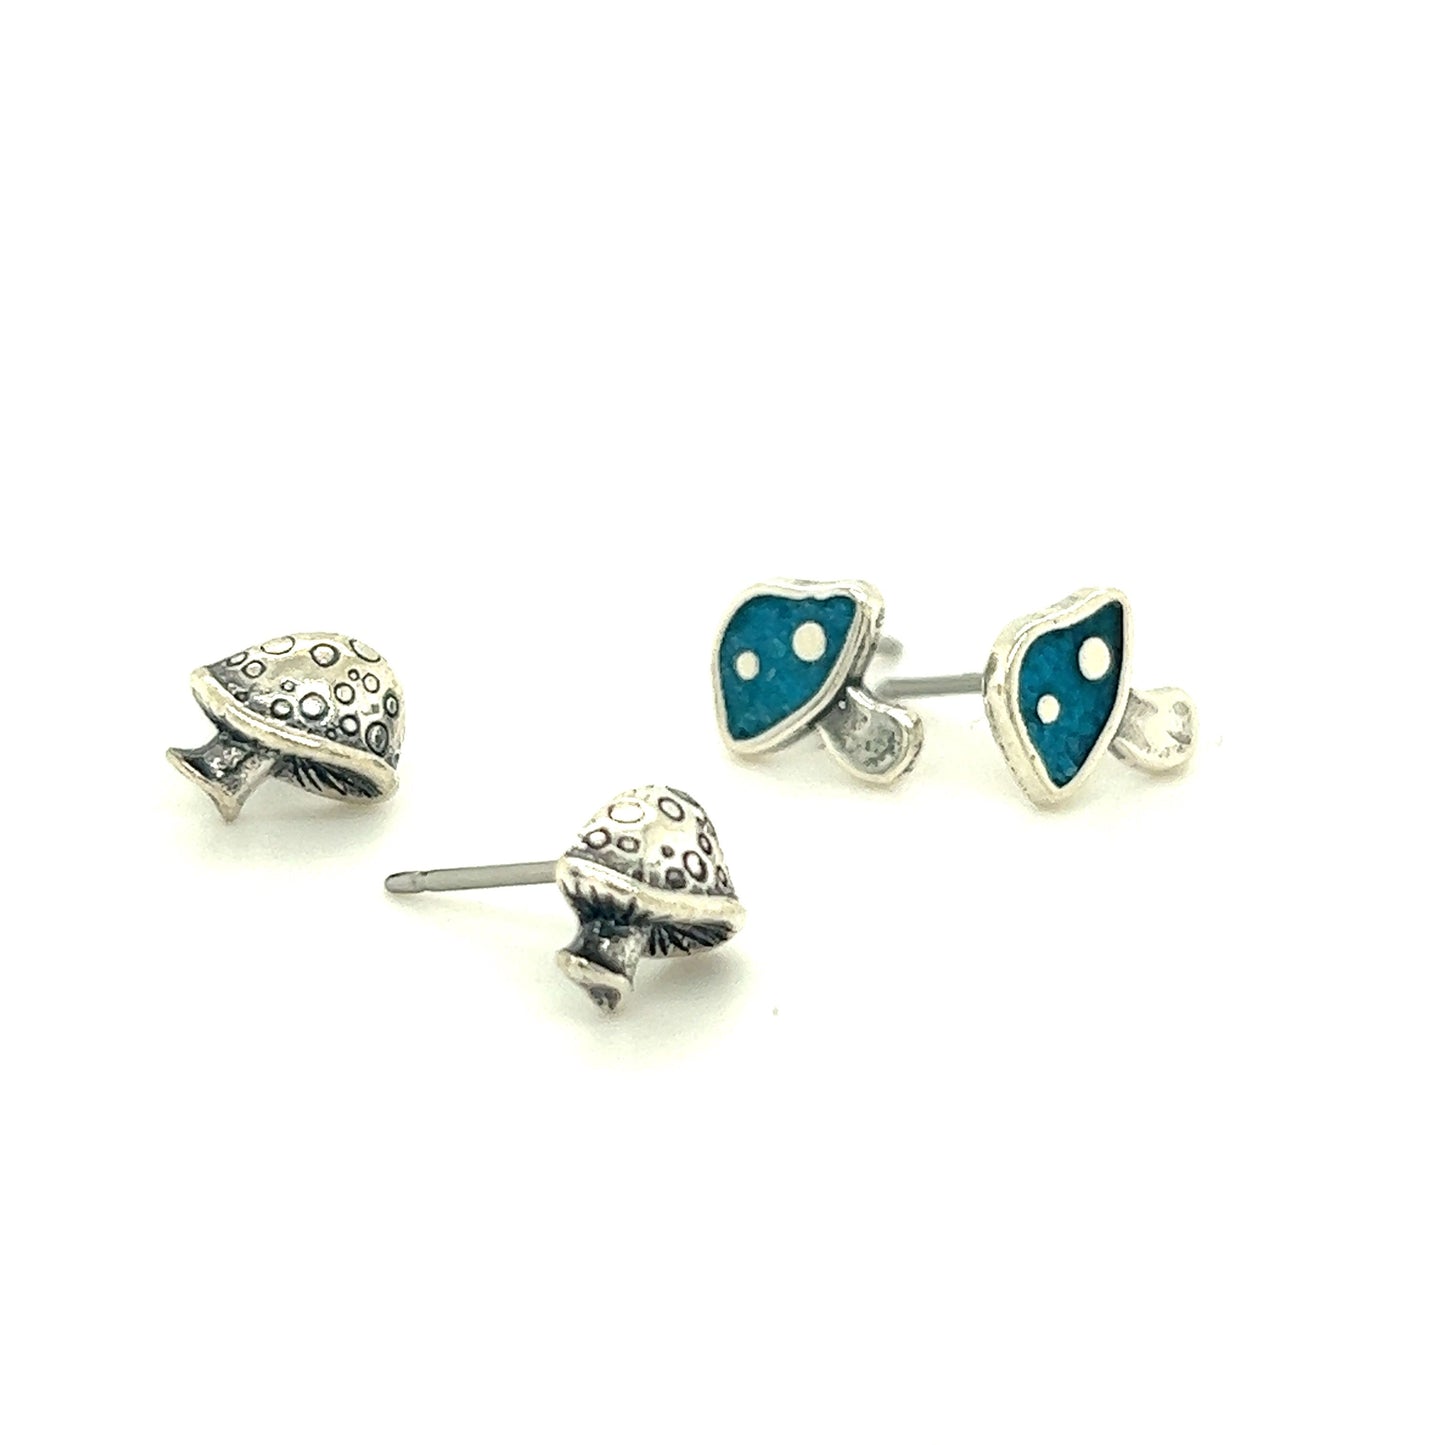 A pair of Mushroom Stud Earrings accented with Super Silver.